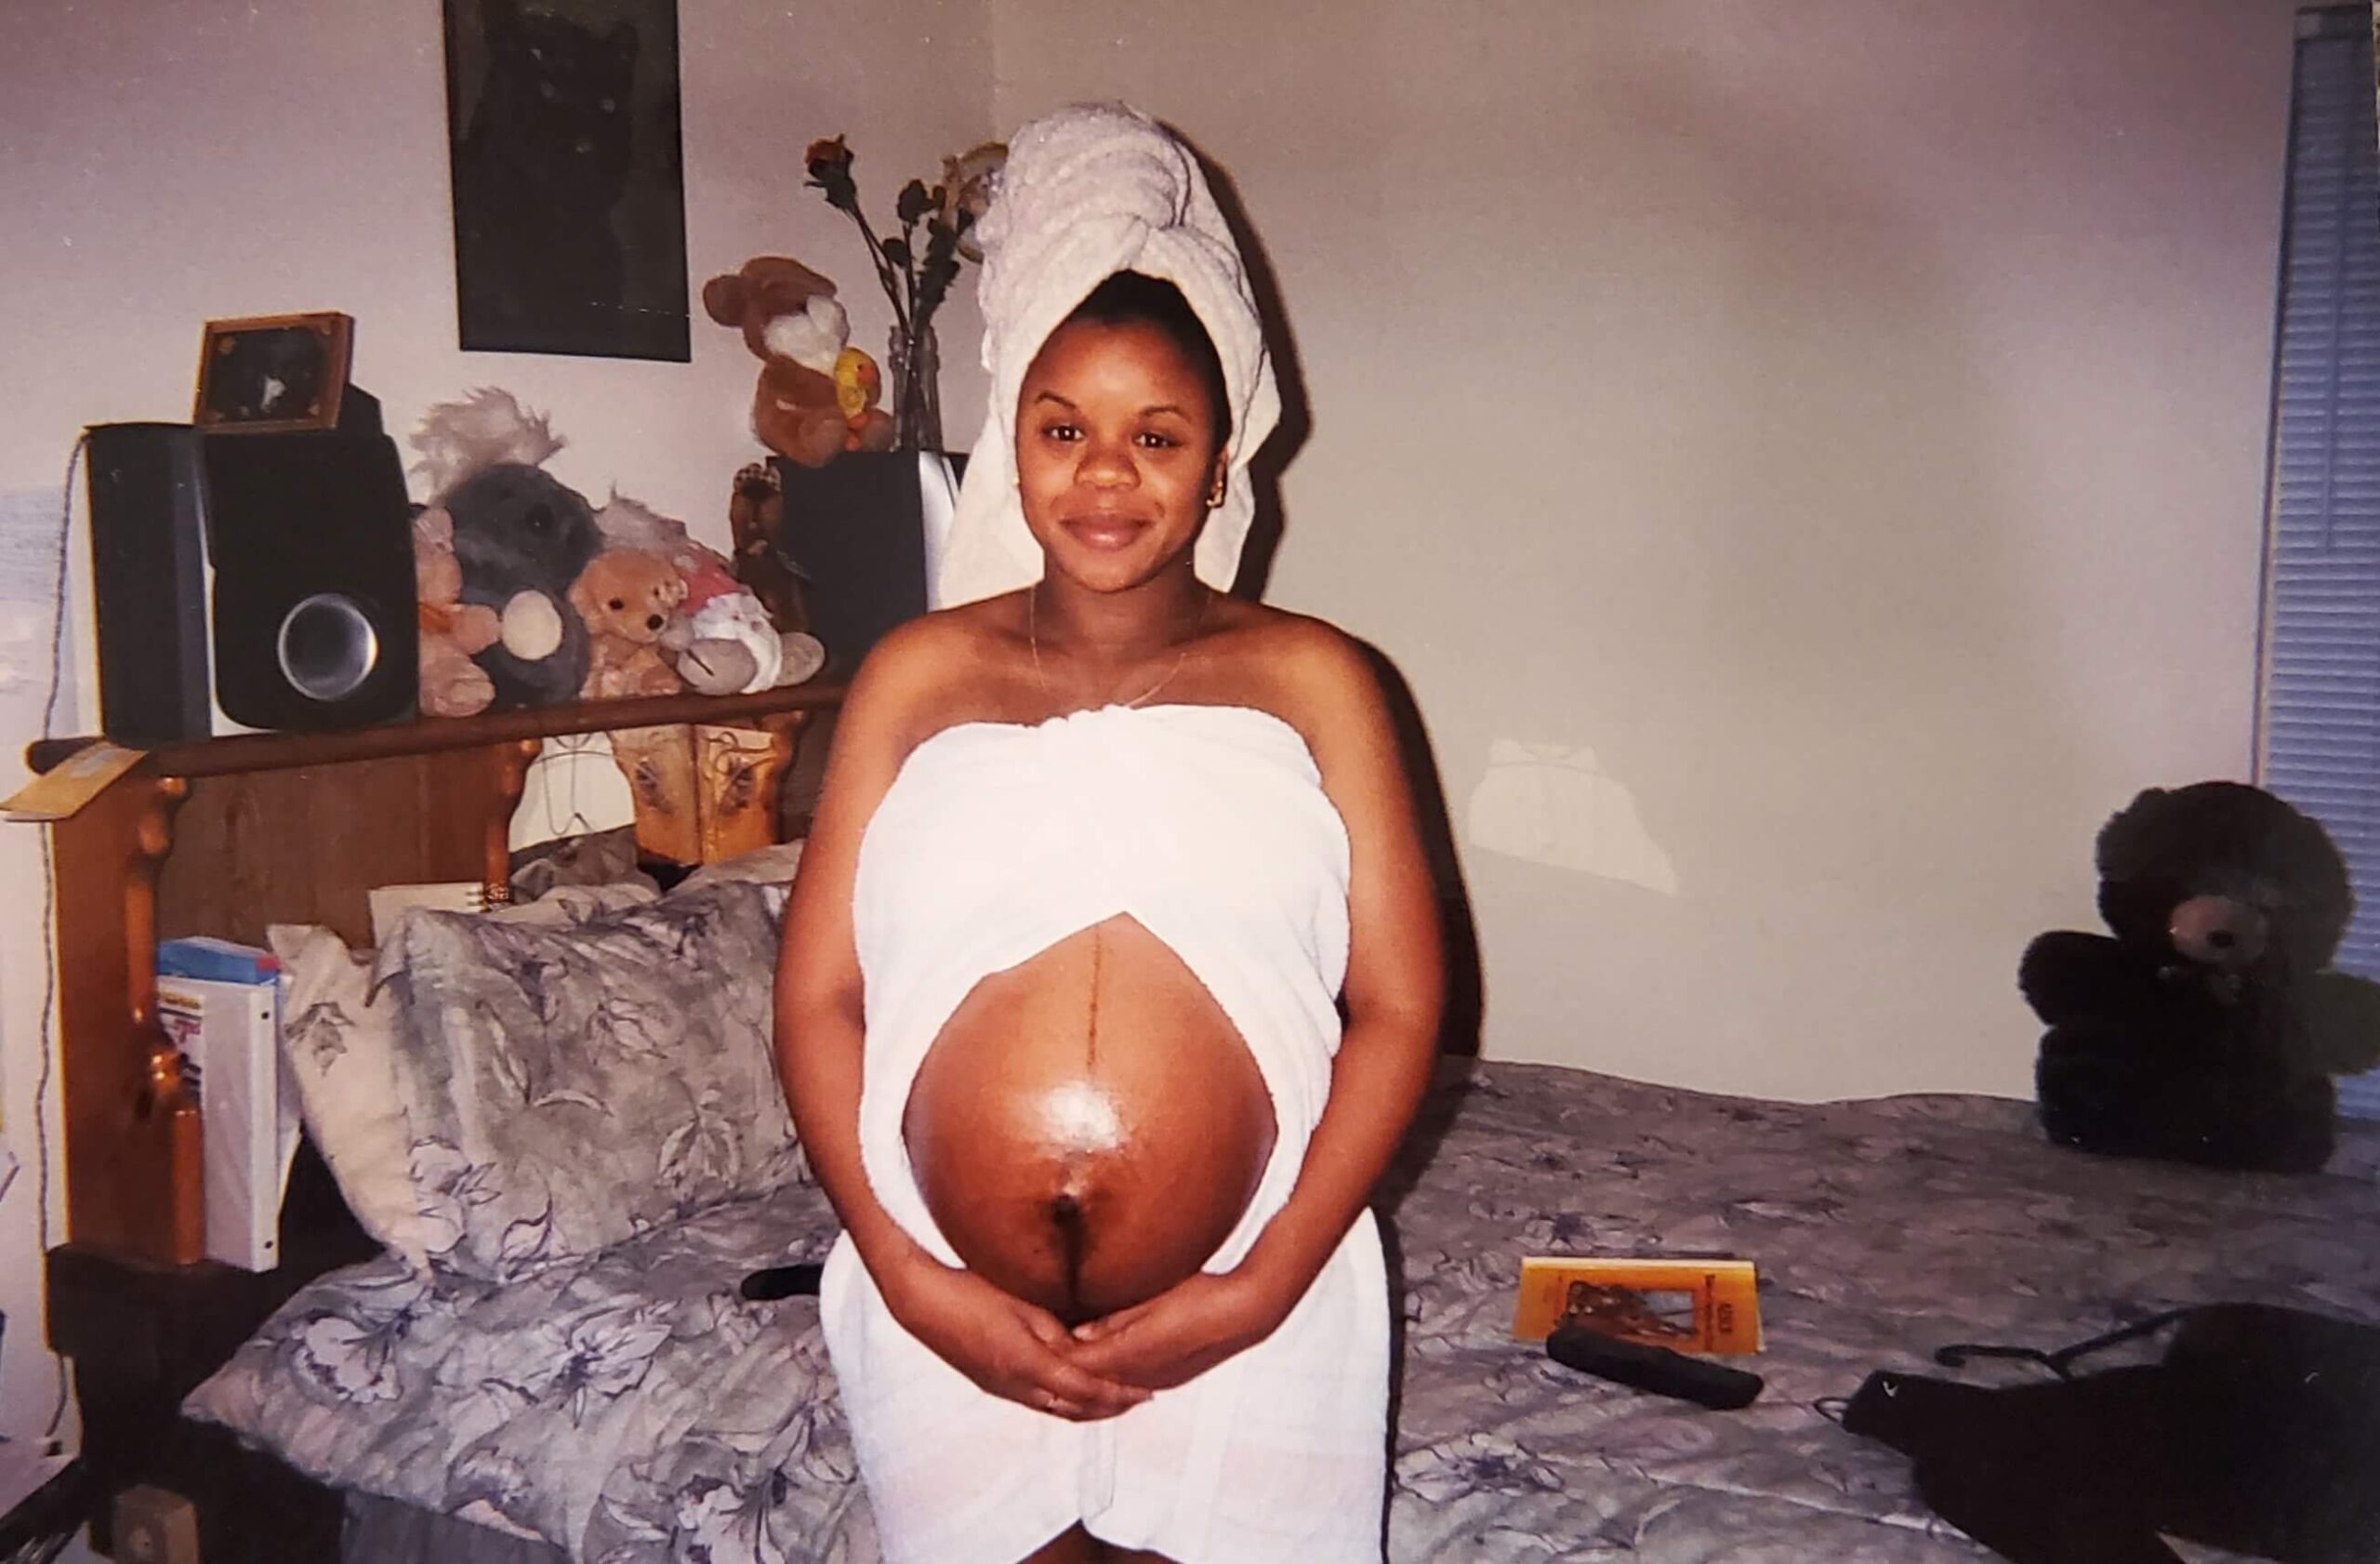 Certified love coach Shay 'Your Love Diva' standing in a bedroom with her pregnant belly exposed